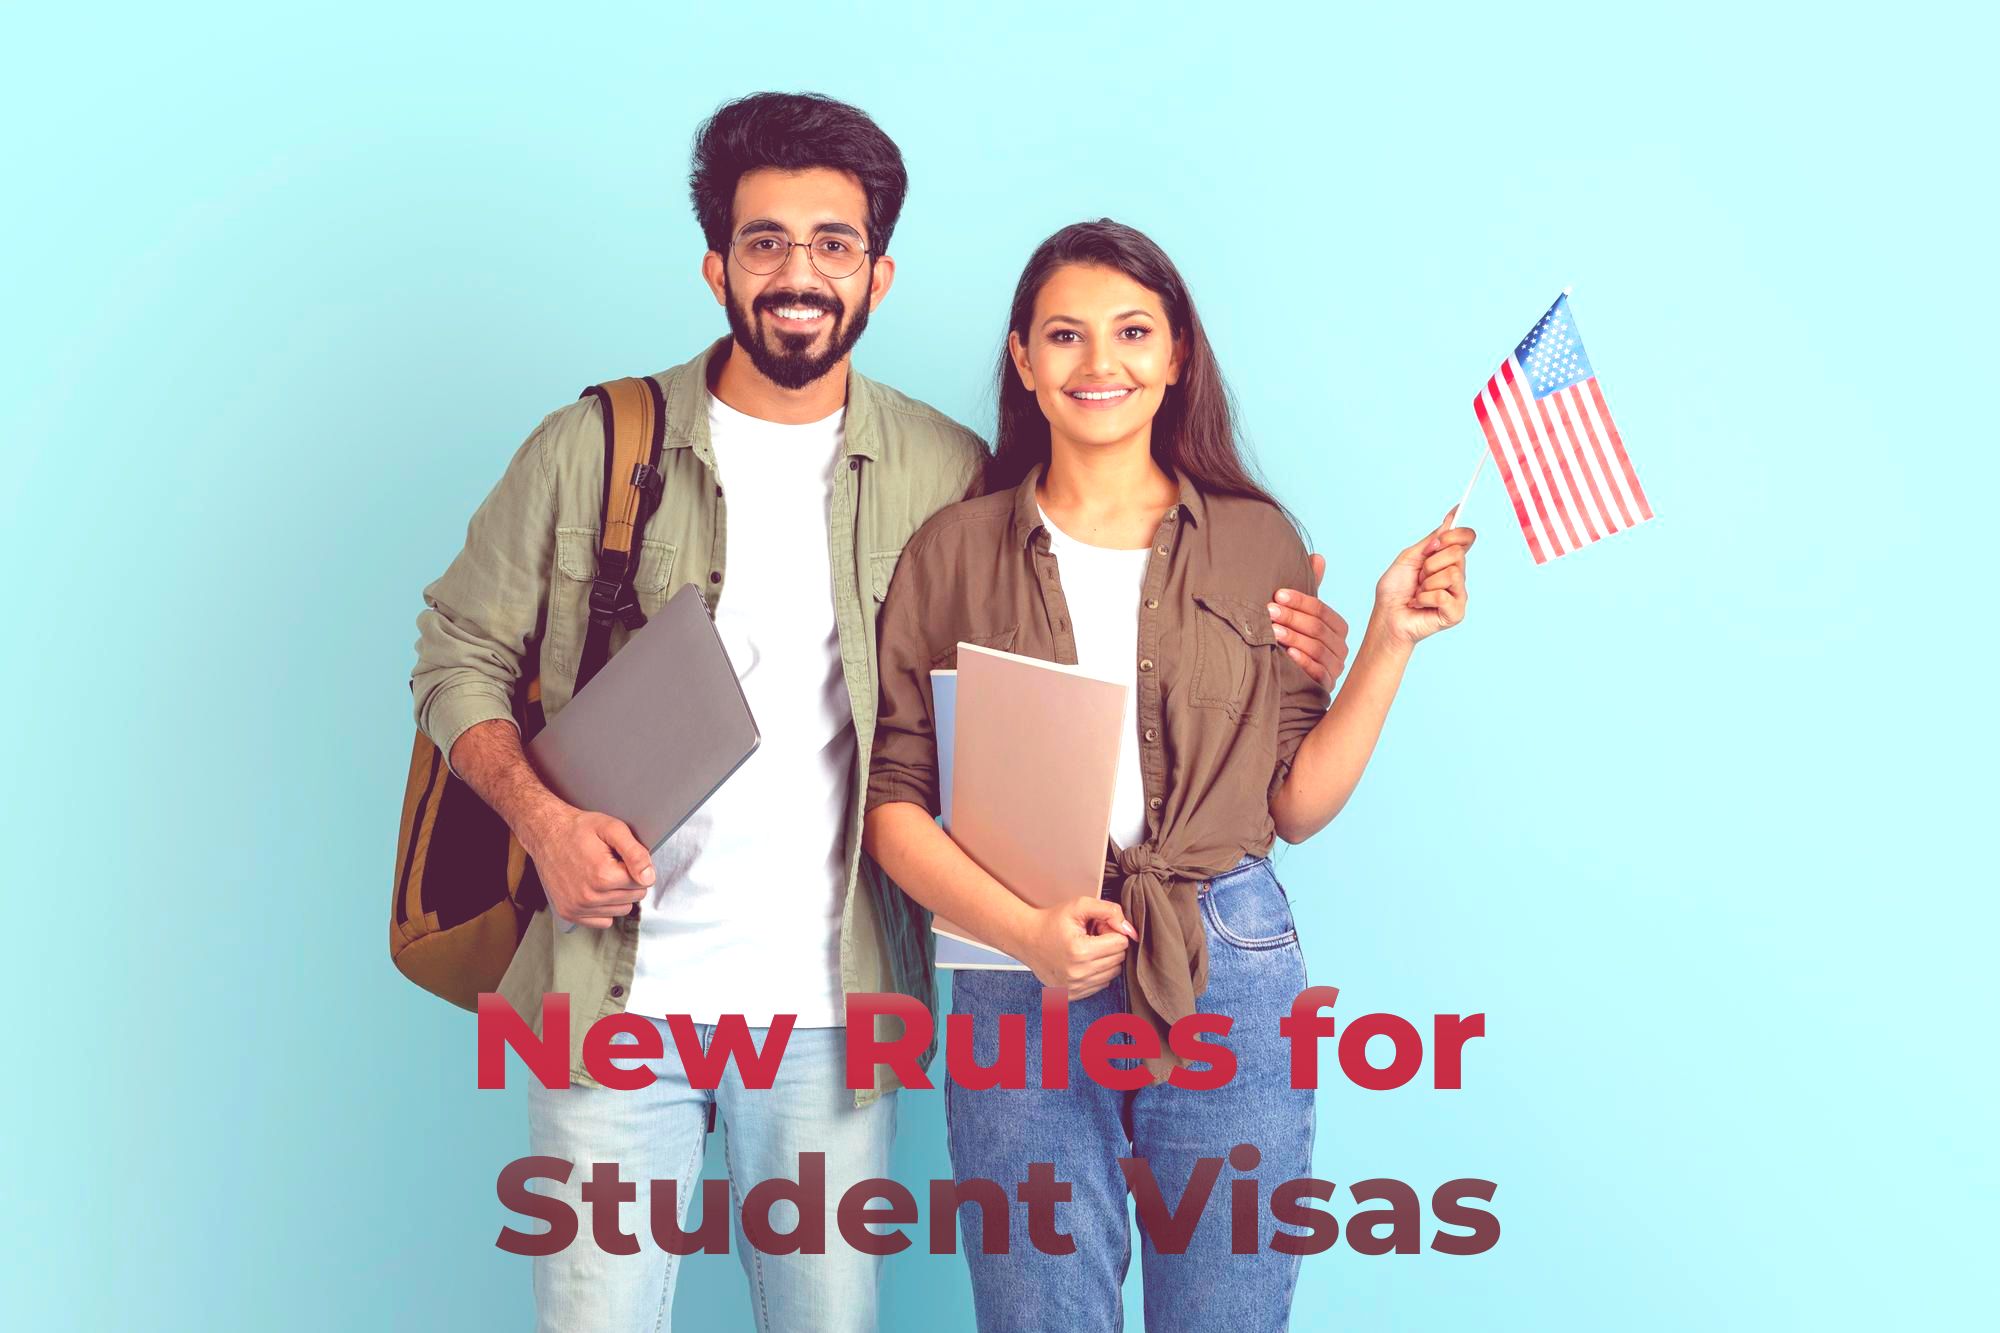 US Student Visa New Rules for appointment